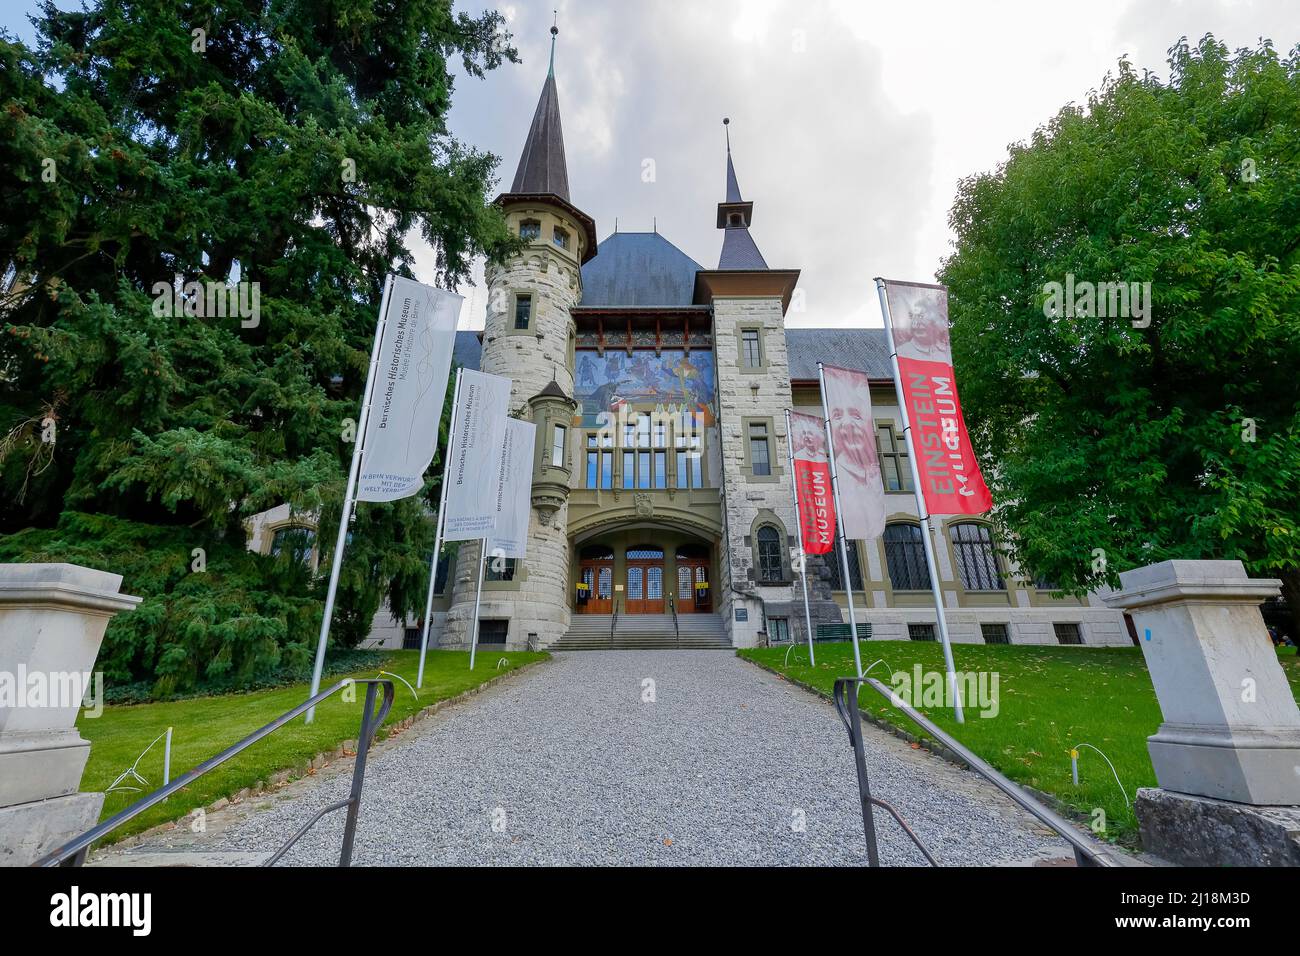 Bern, Switzerland - September 06, 2015: The Bern Historical Museum, was designed by architect Andre Lamber and built in 1894. The City of Bern is one Stock Photo